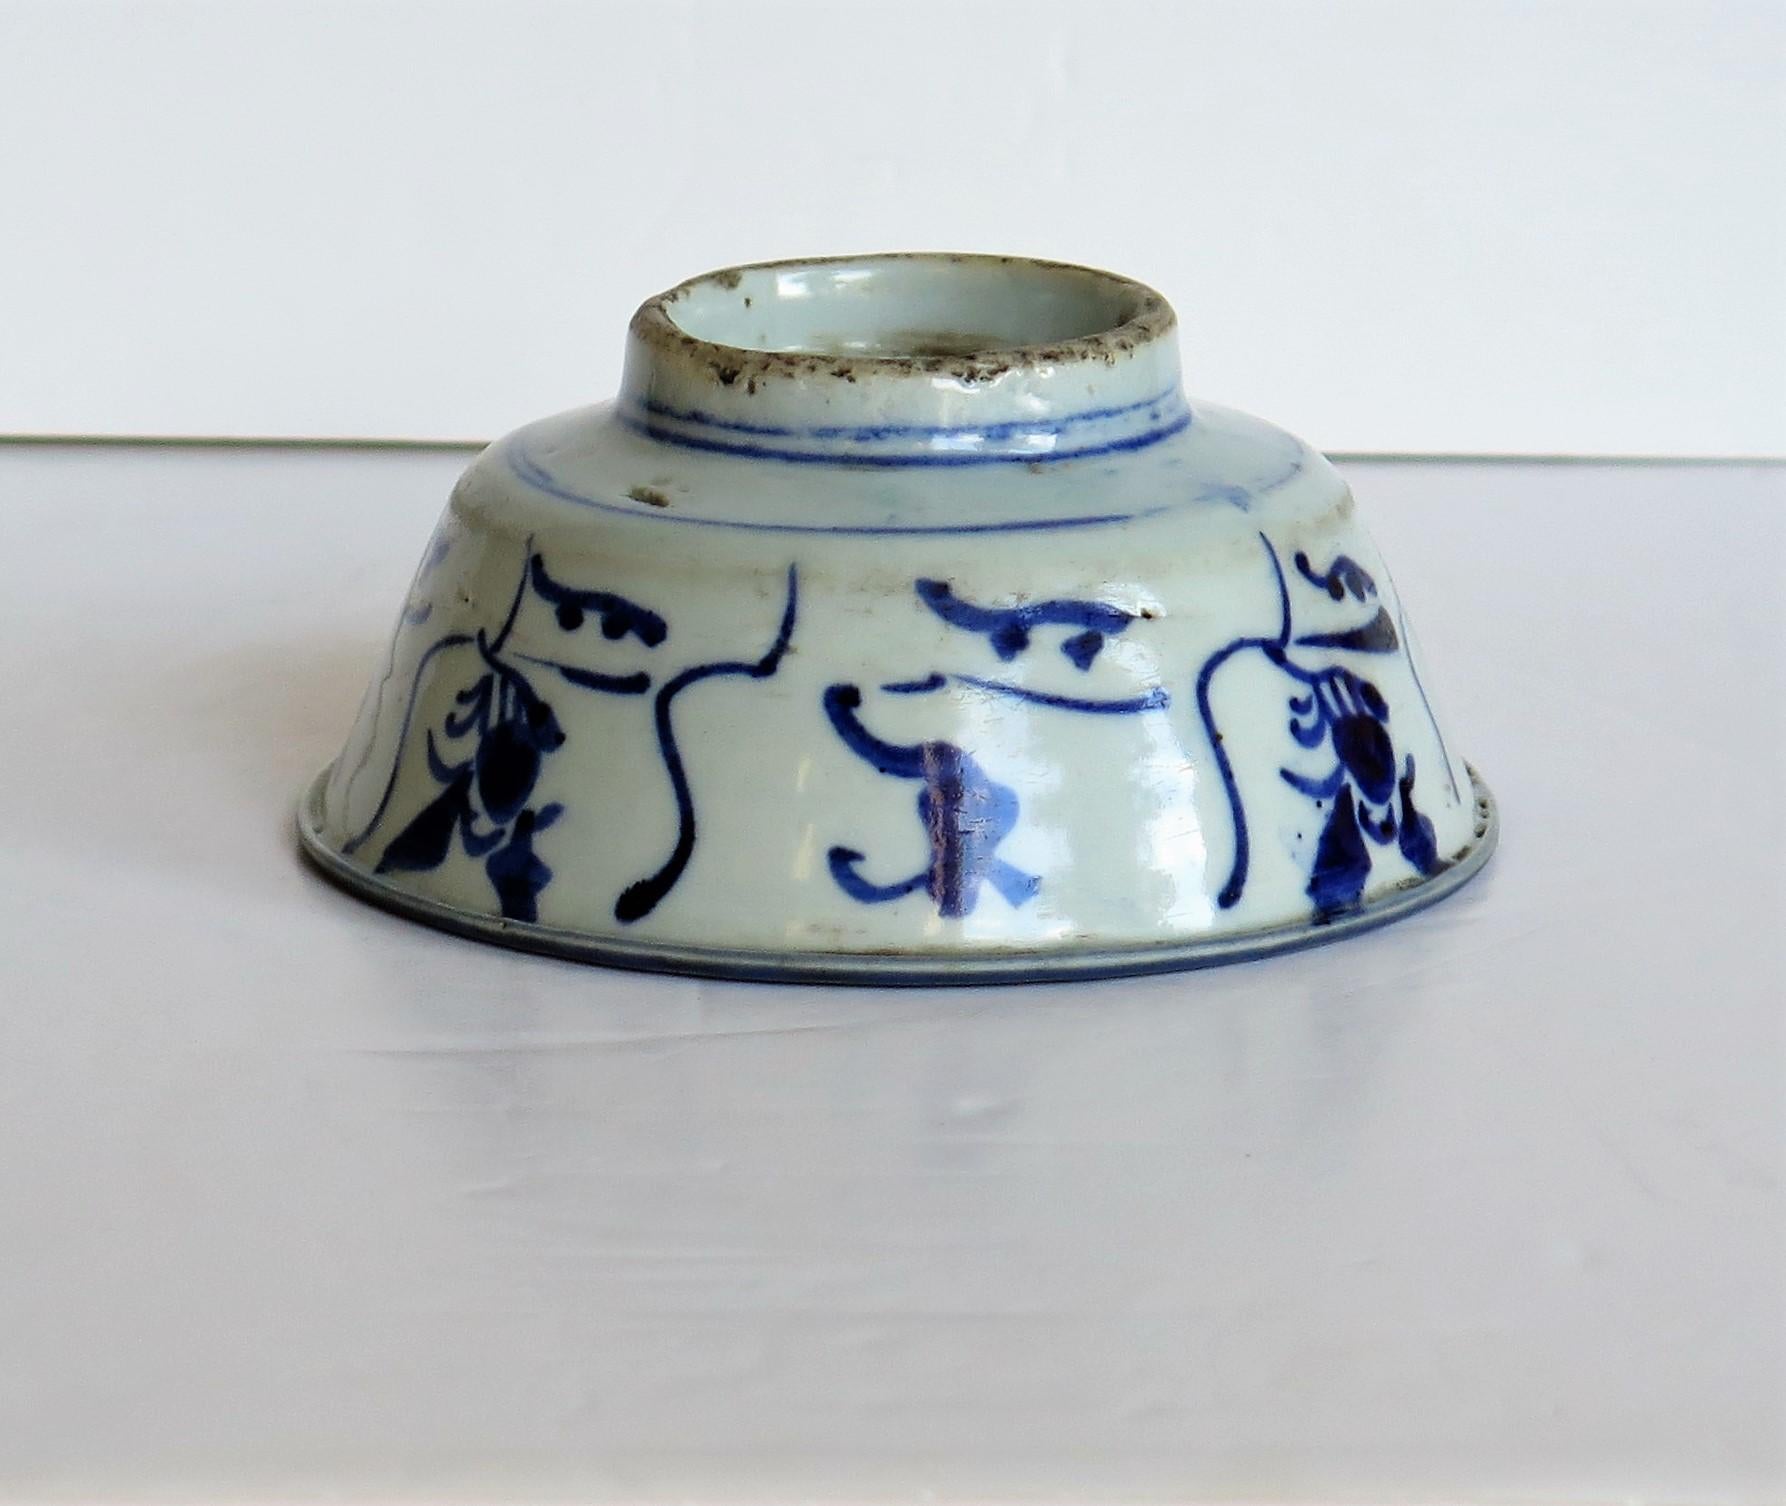 Chinese Porcelain Bowl Hand Painted Blue and White, 17th Century Ming Export For Sale 7